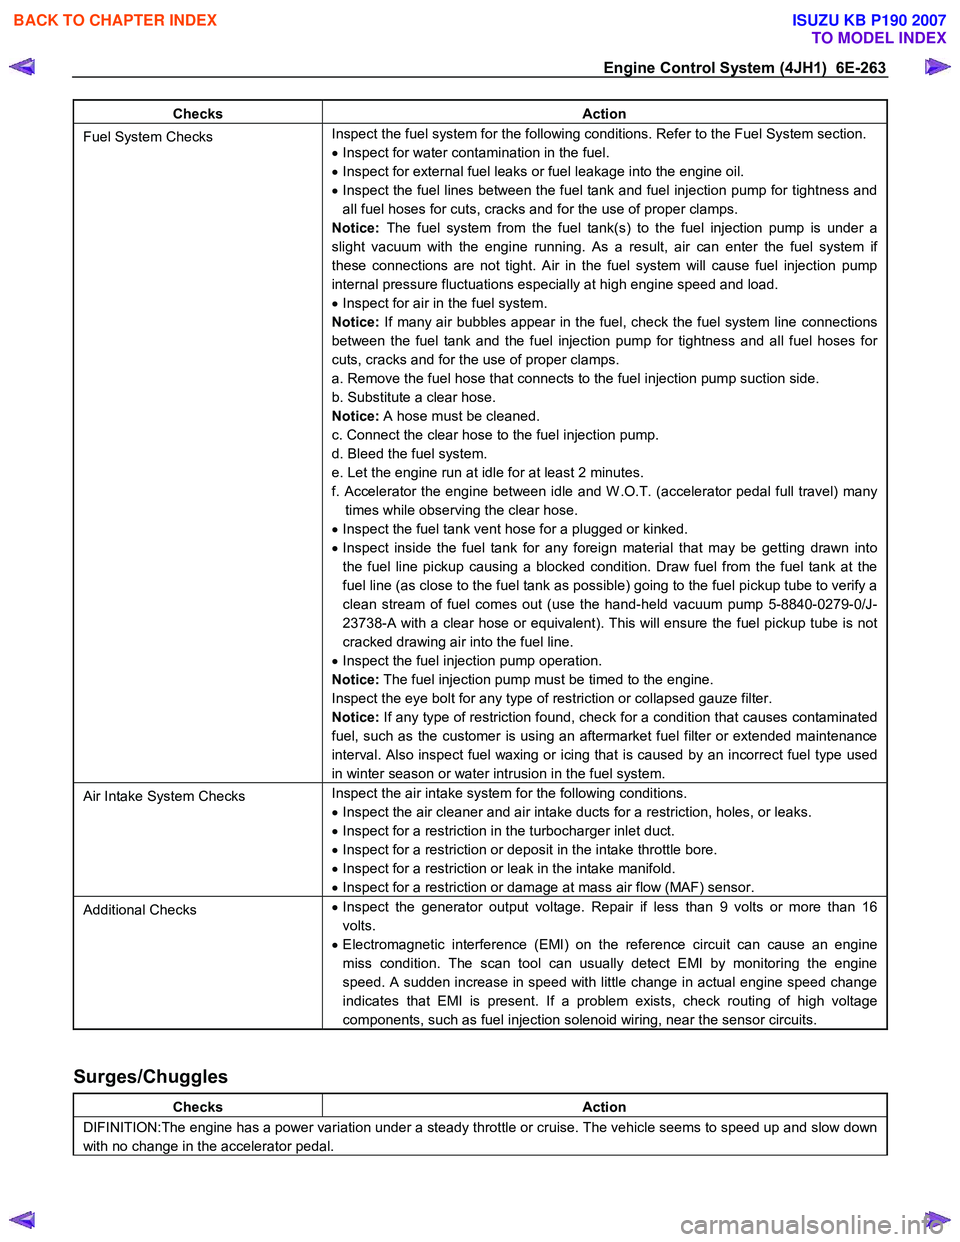 ISUZU KB P190 2007  Workshop Repair Manual Engine Control System (4JH1)  6E-263 
Checks Action 
Fuel System Checks Inspect the fuel system for the following conditions. Refer to the Fuel System section.  
•   Inspect for water contamination 